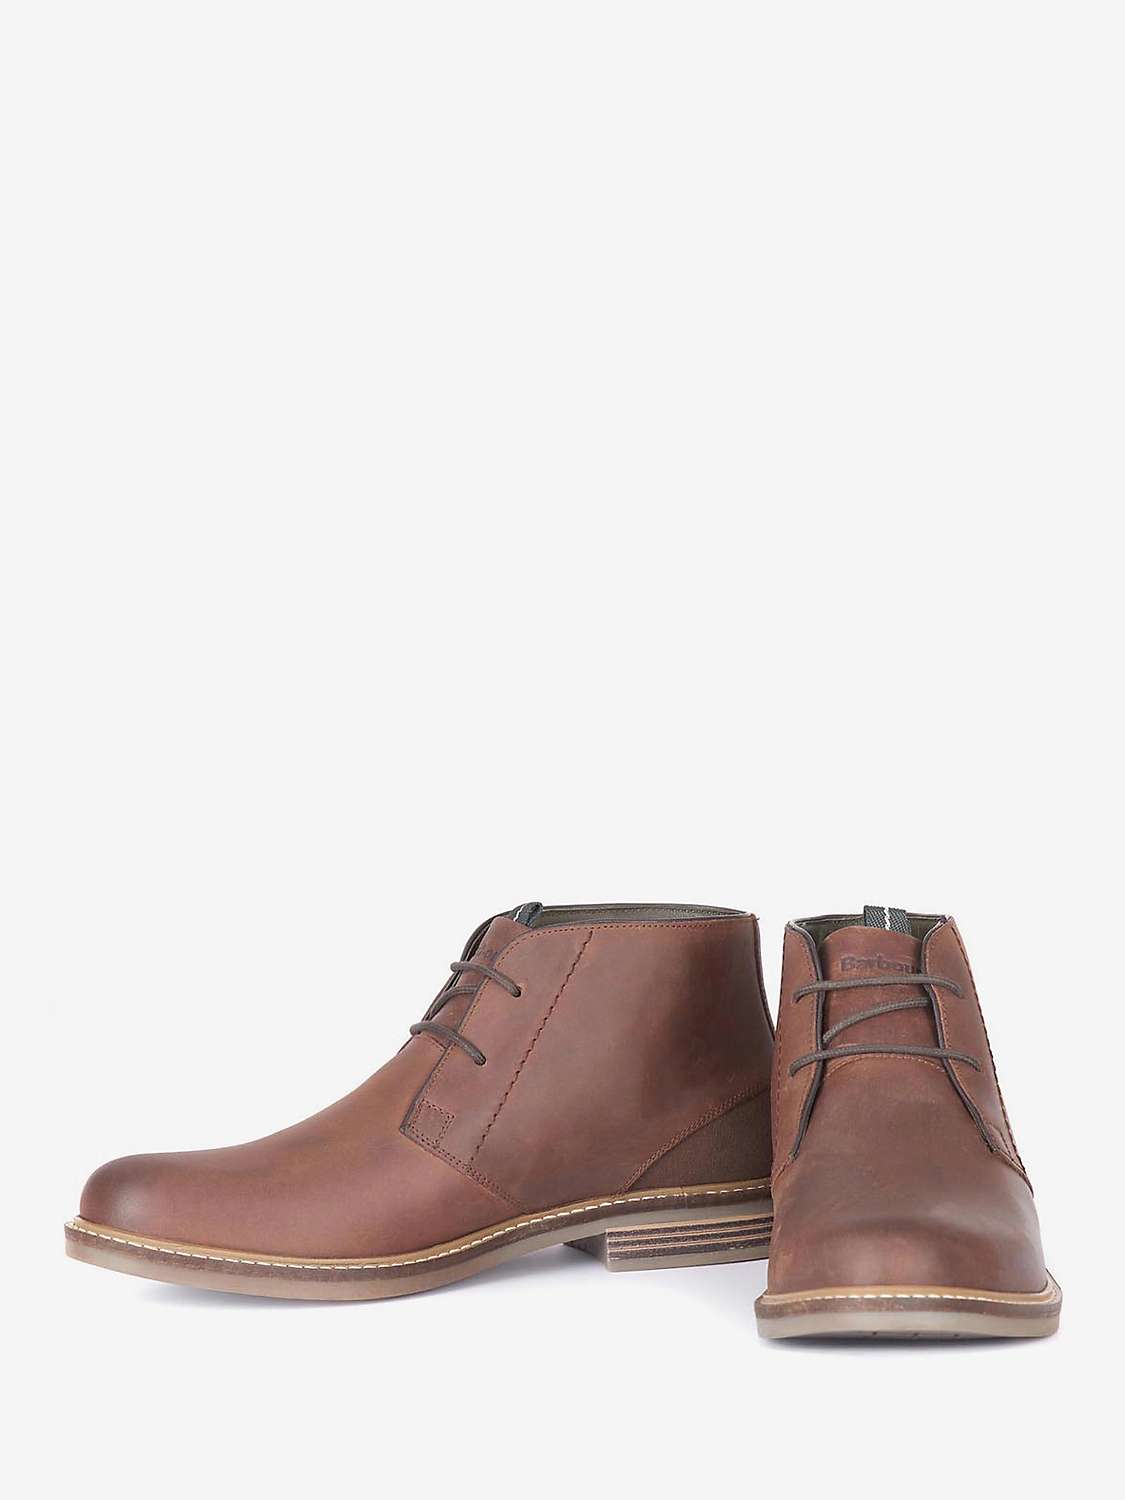 Buy Barbour Redhead Leather Chukka Boots Online at johnlewis.com